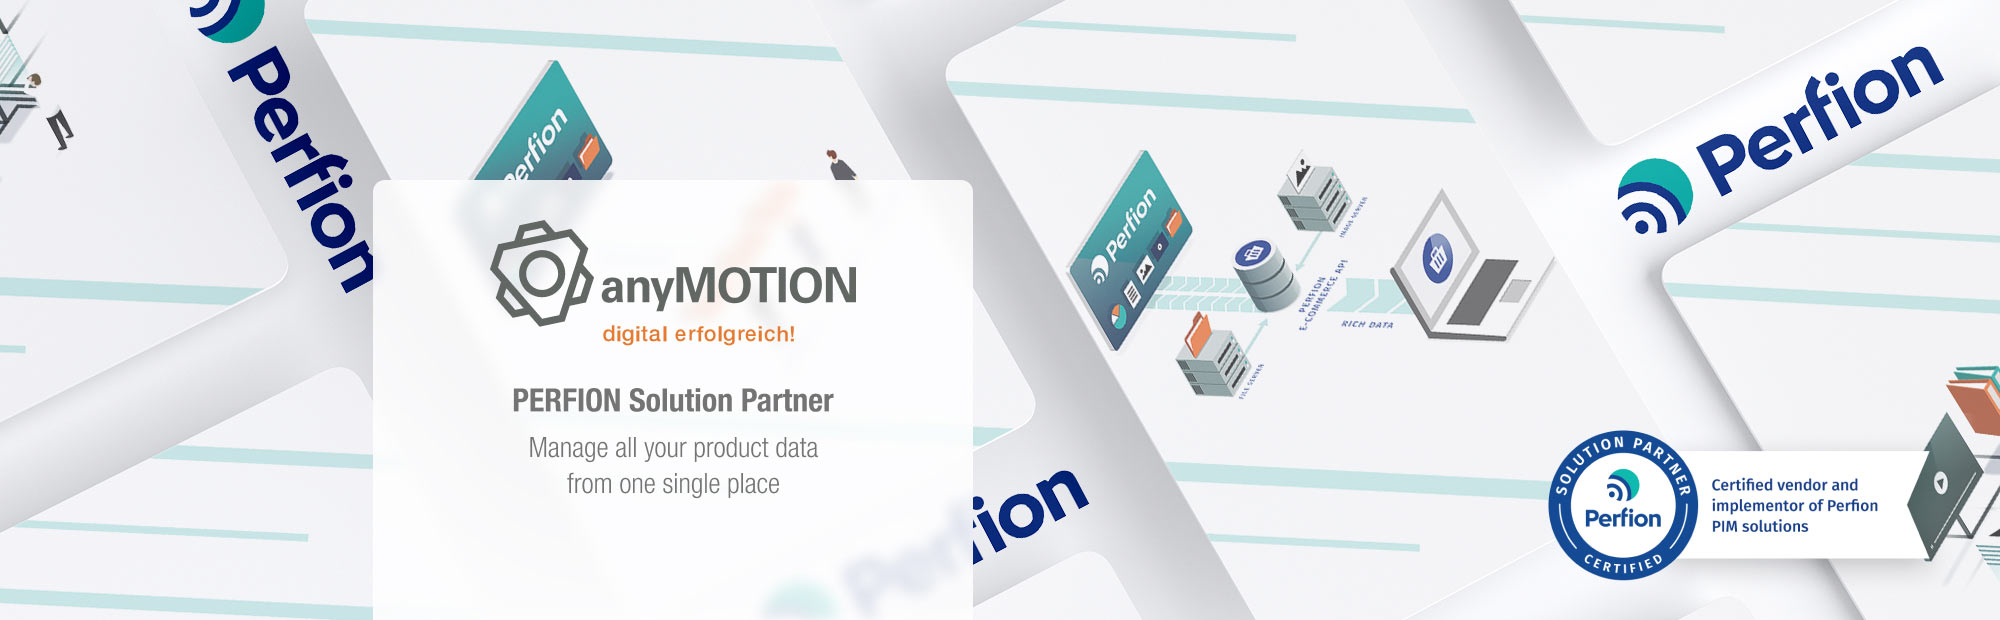 PERFION Solution Partner We help you bring all your data sources together in one place. Simple.